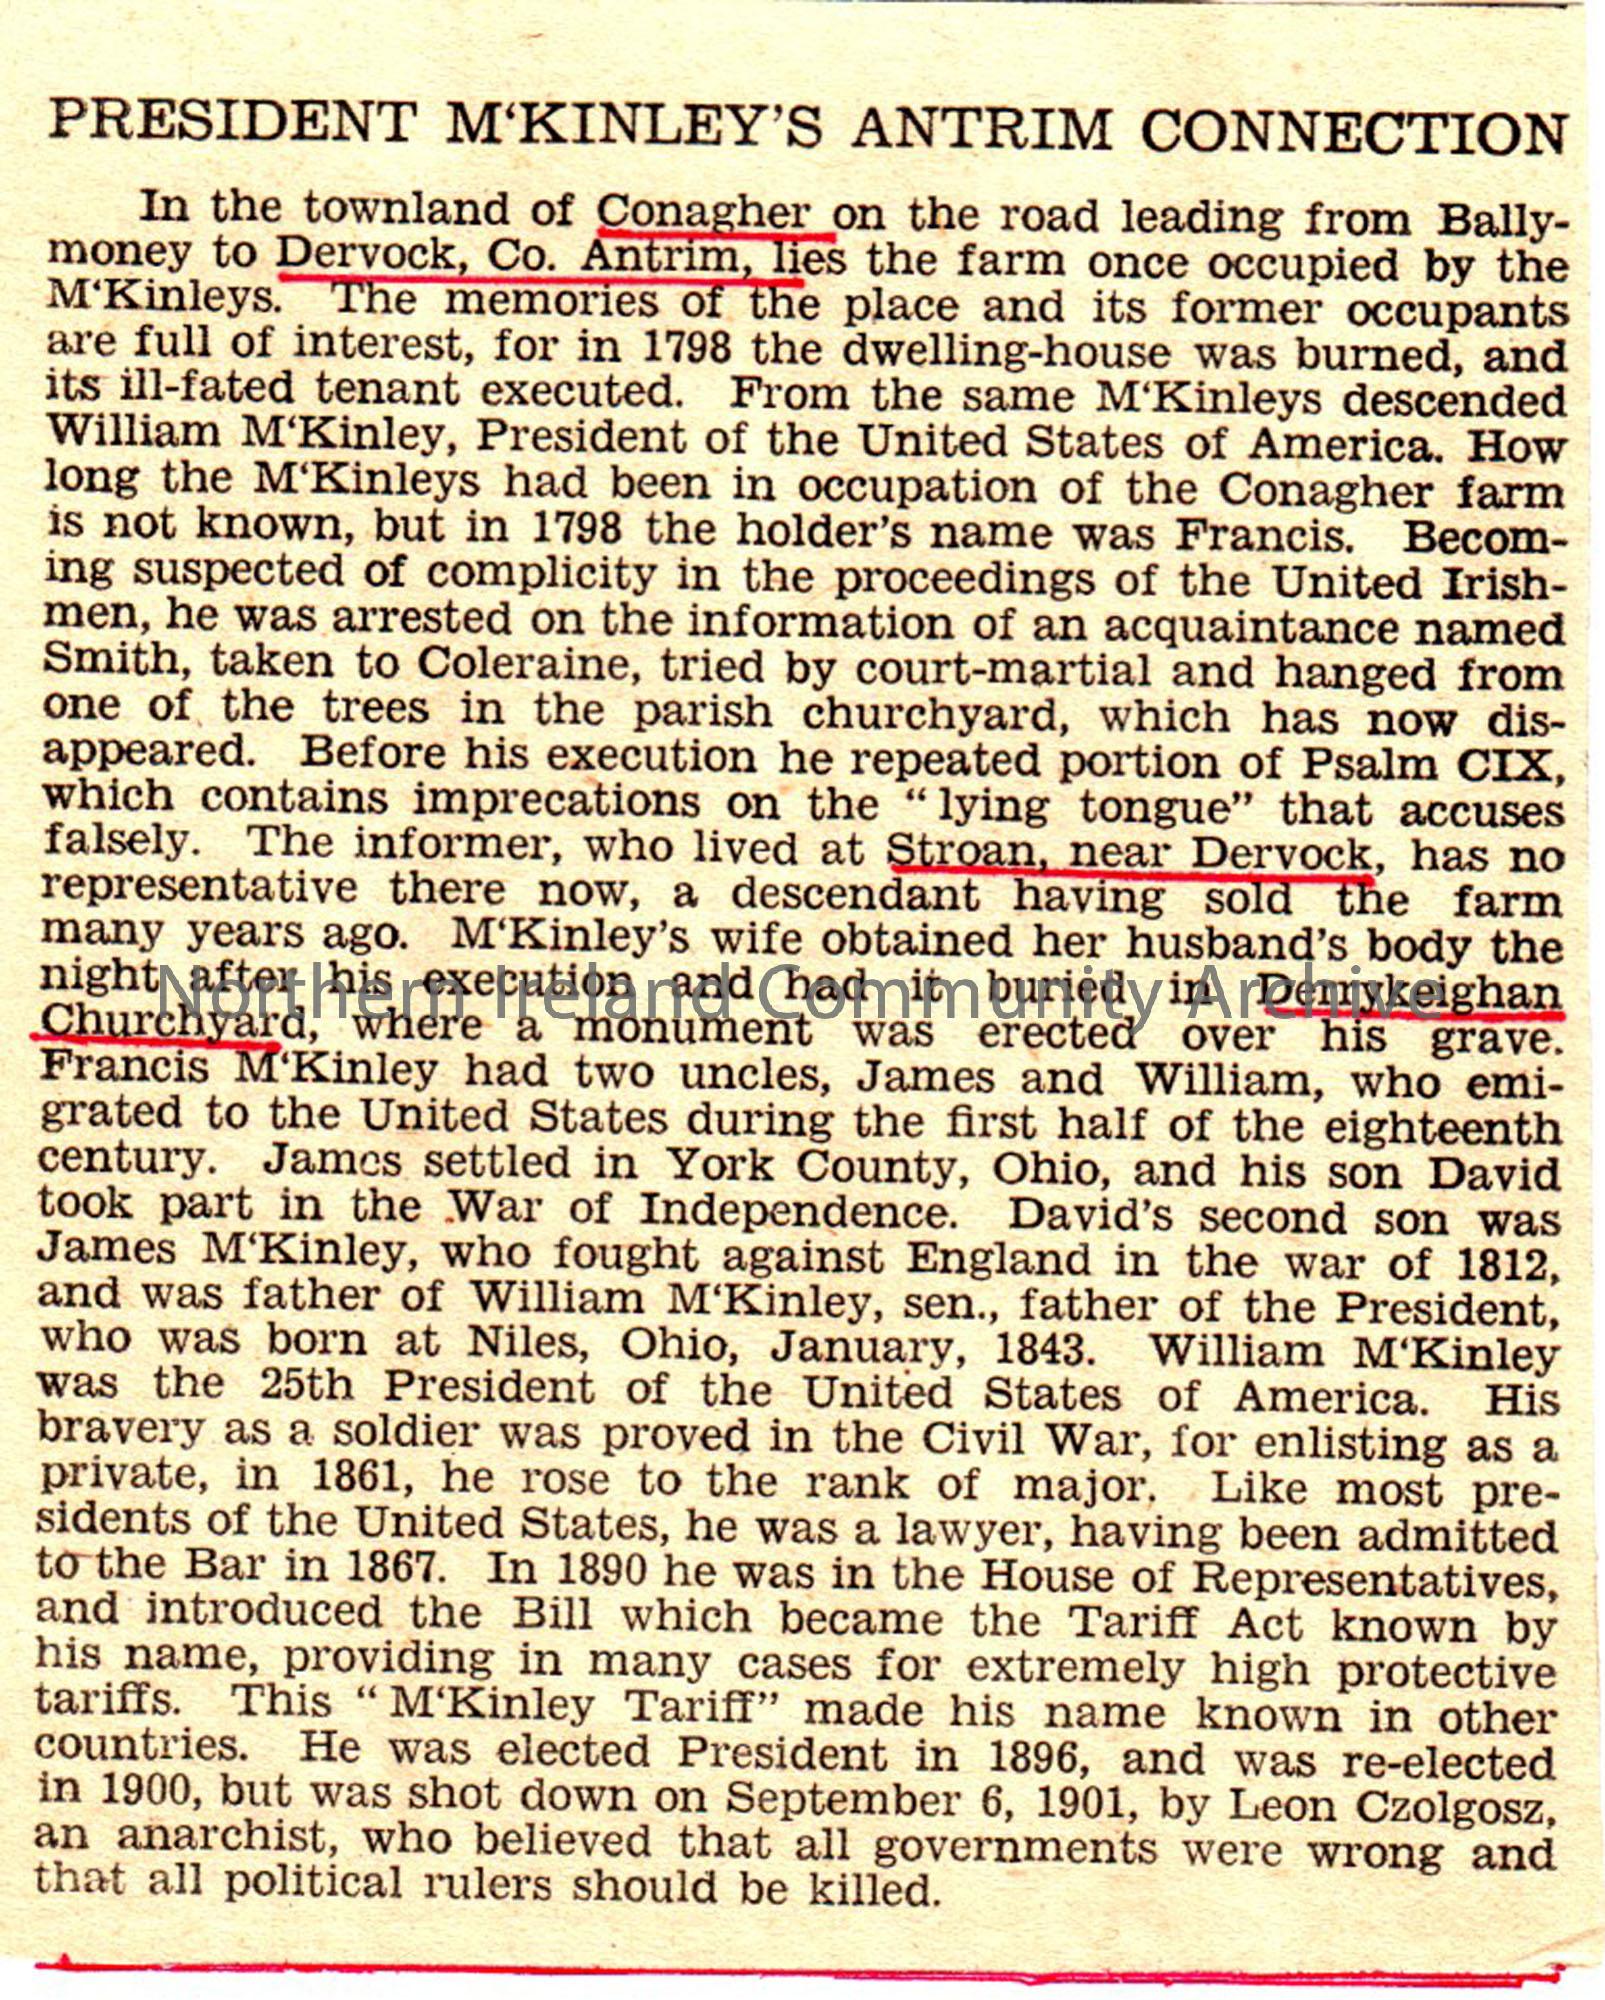 Article detailing President McKinley’s Antrim Connections.